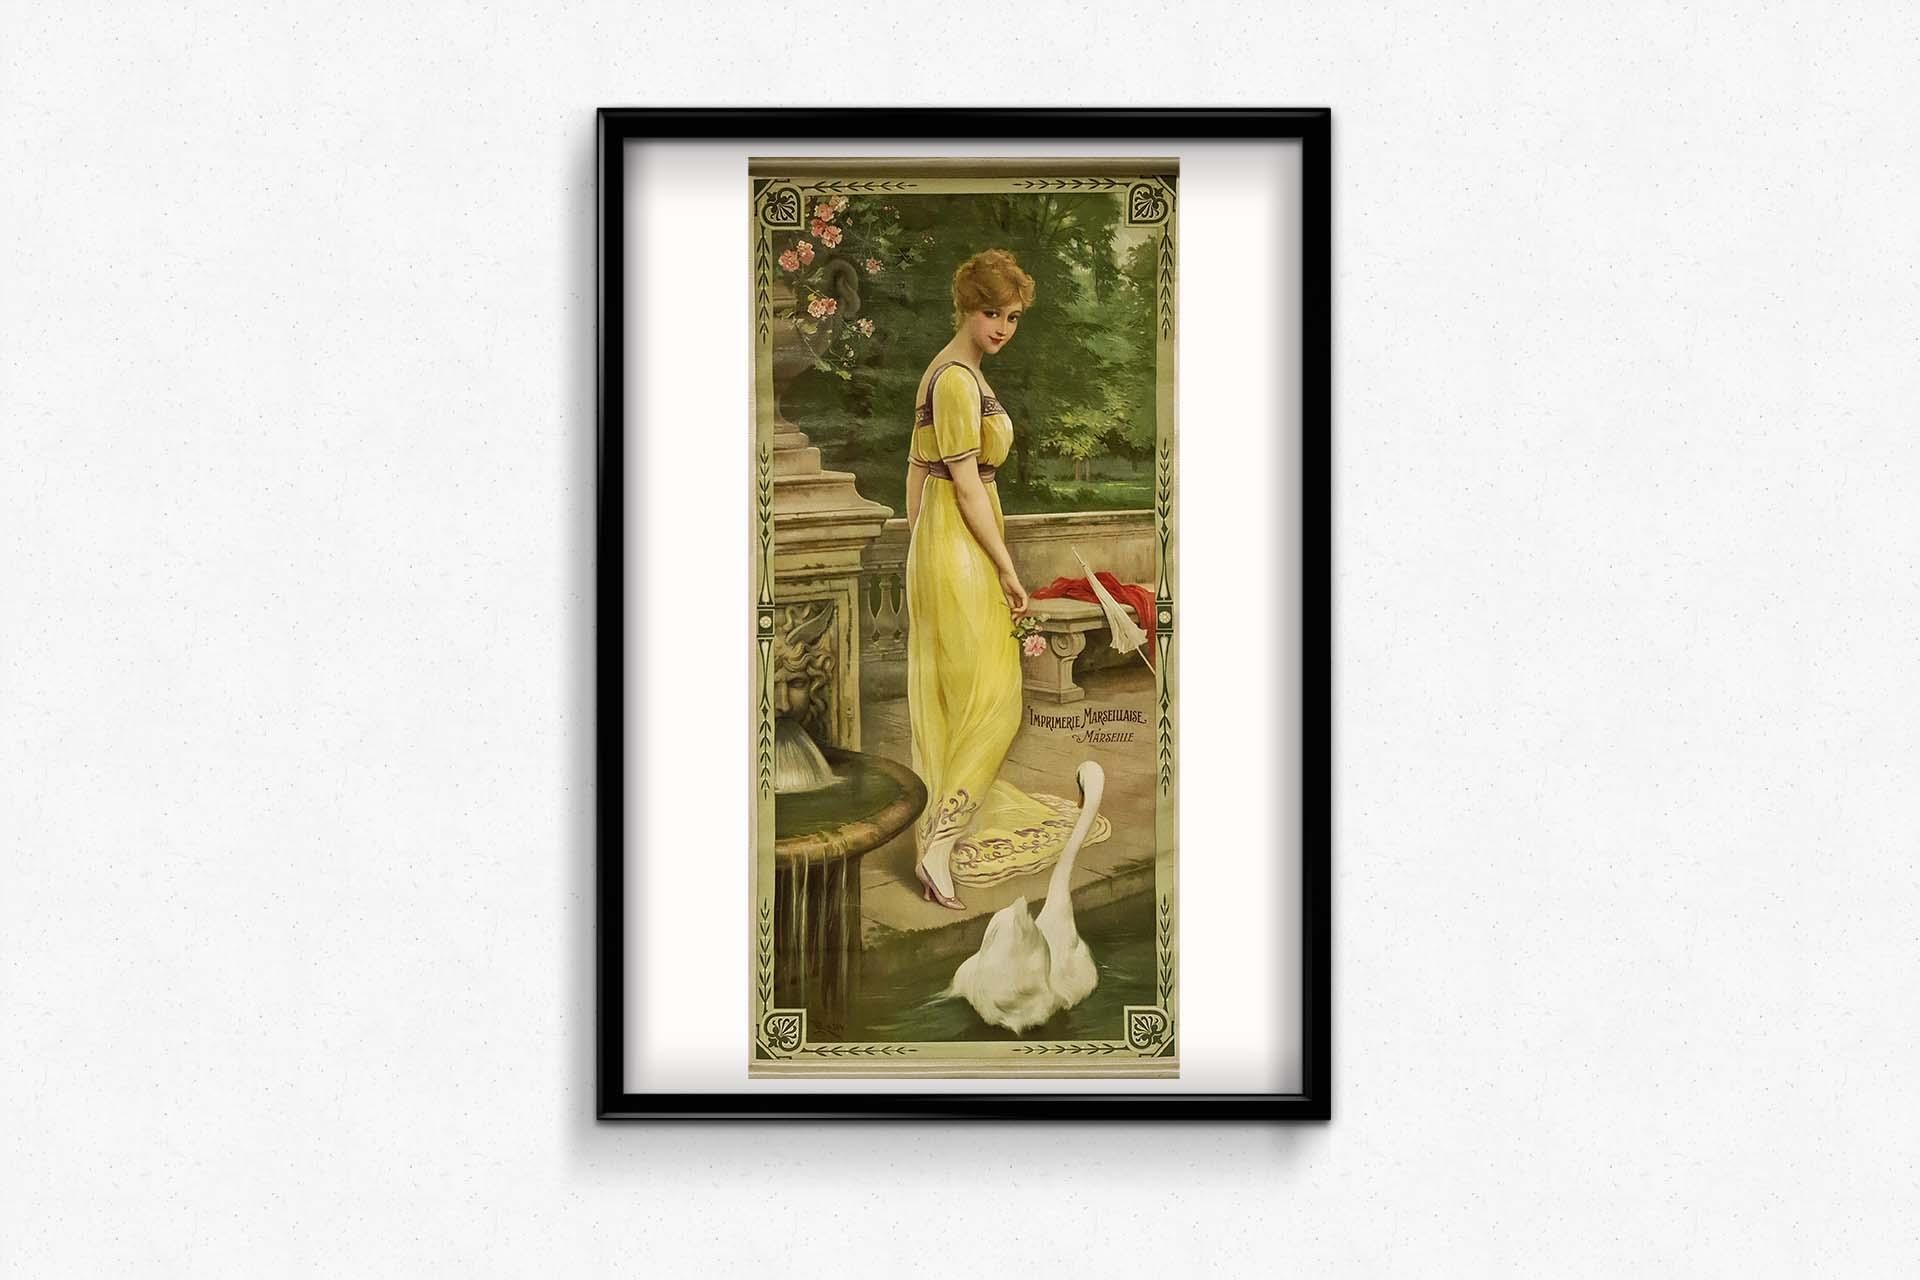 Very beautiful lithograph printed on silk by Luigi Rossi (1853-1923) representing a young elegant woman and a swan.